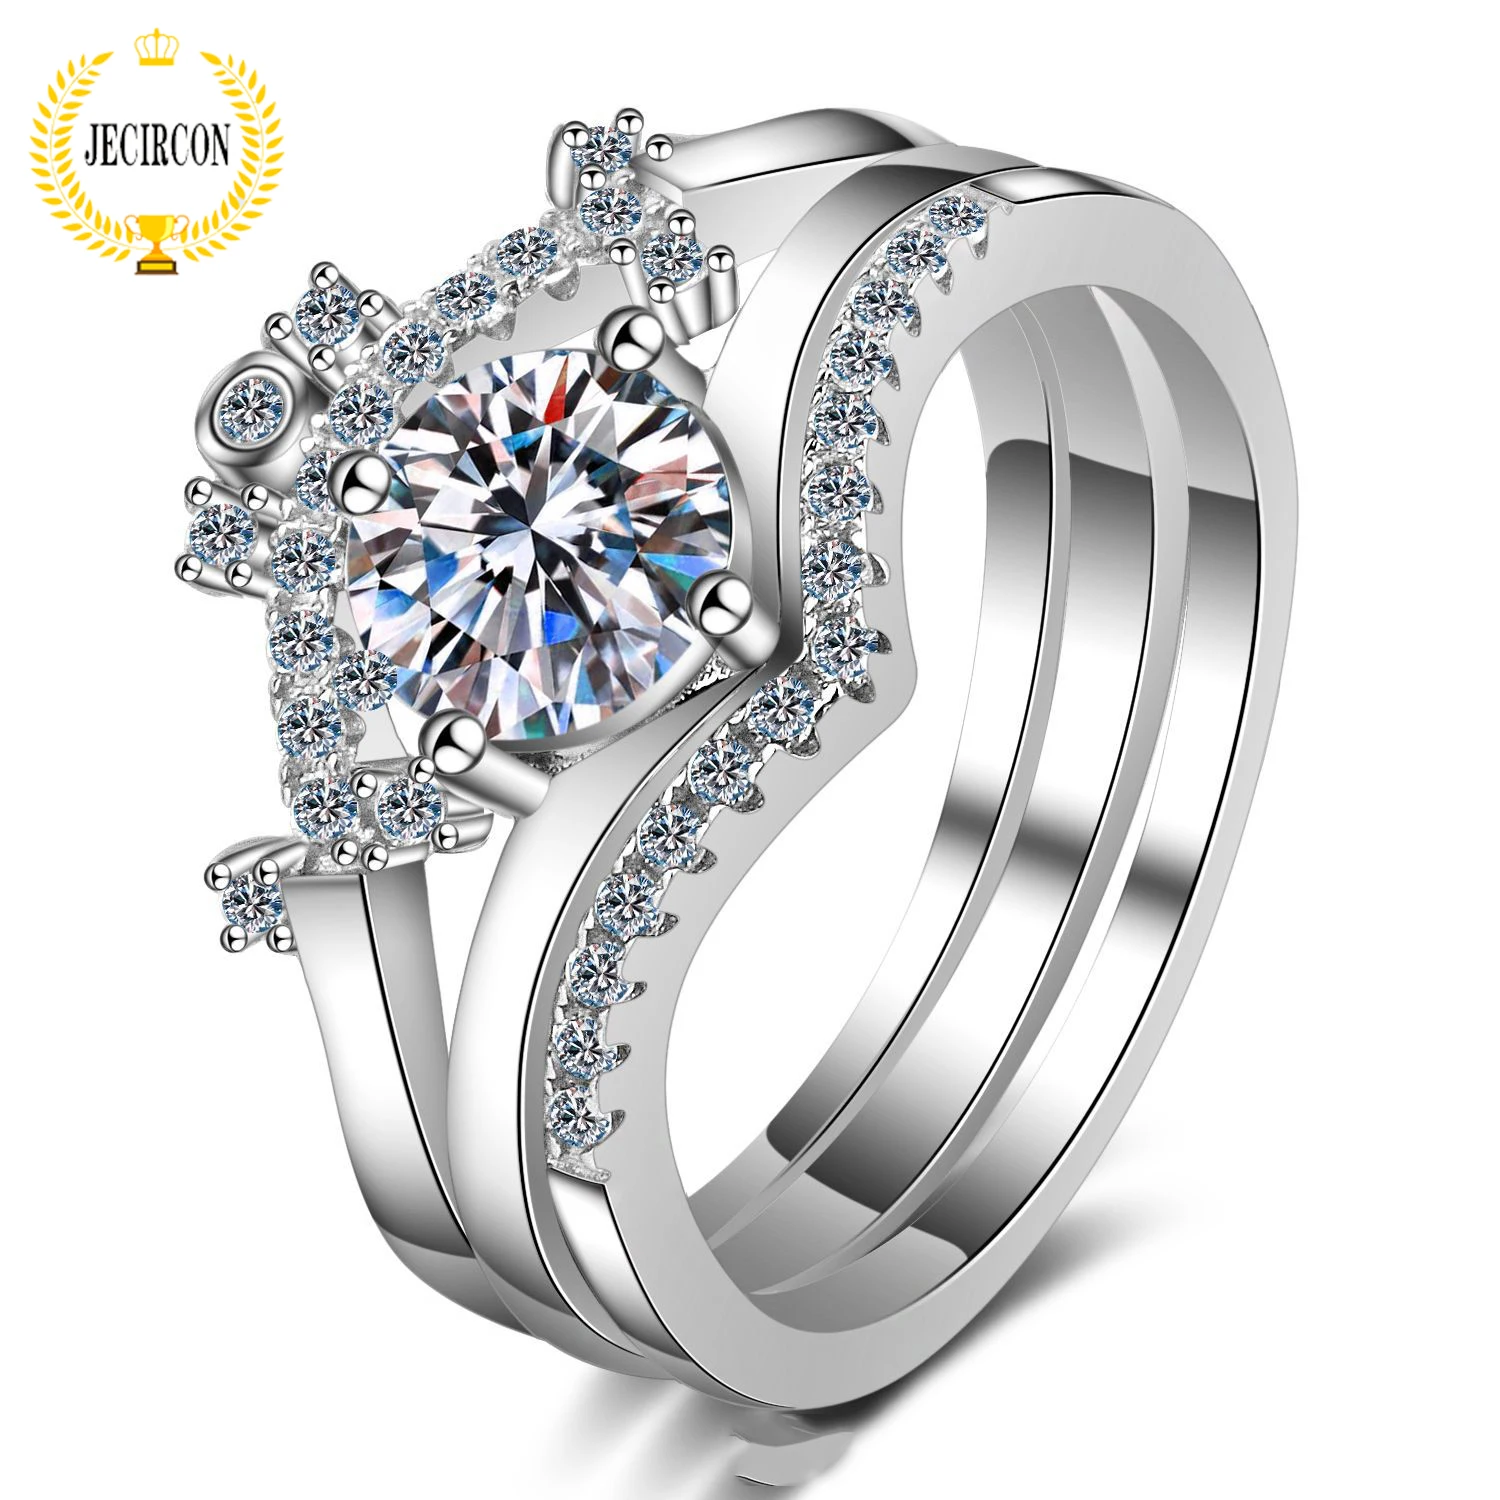 

JECIRCON 0.8ct Moissanite Ring for Women Luxury 4-claw Wedding Band Crown 3 in 1 Simulation Diamond 925 Sterling Silver Jewelry